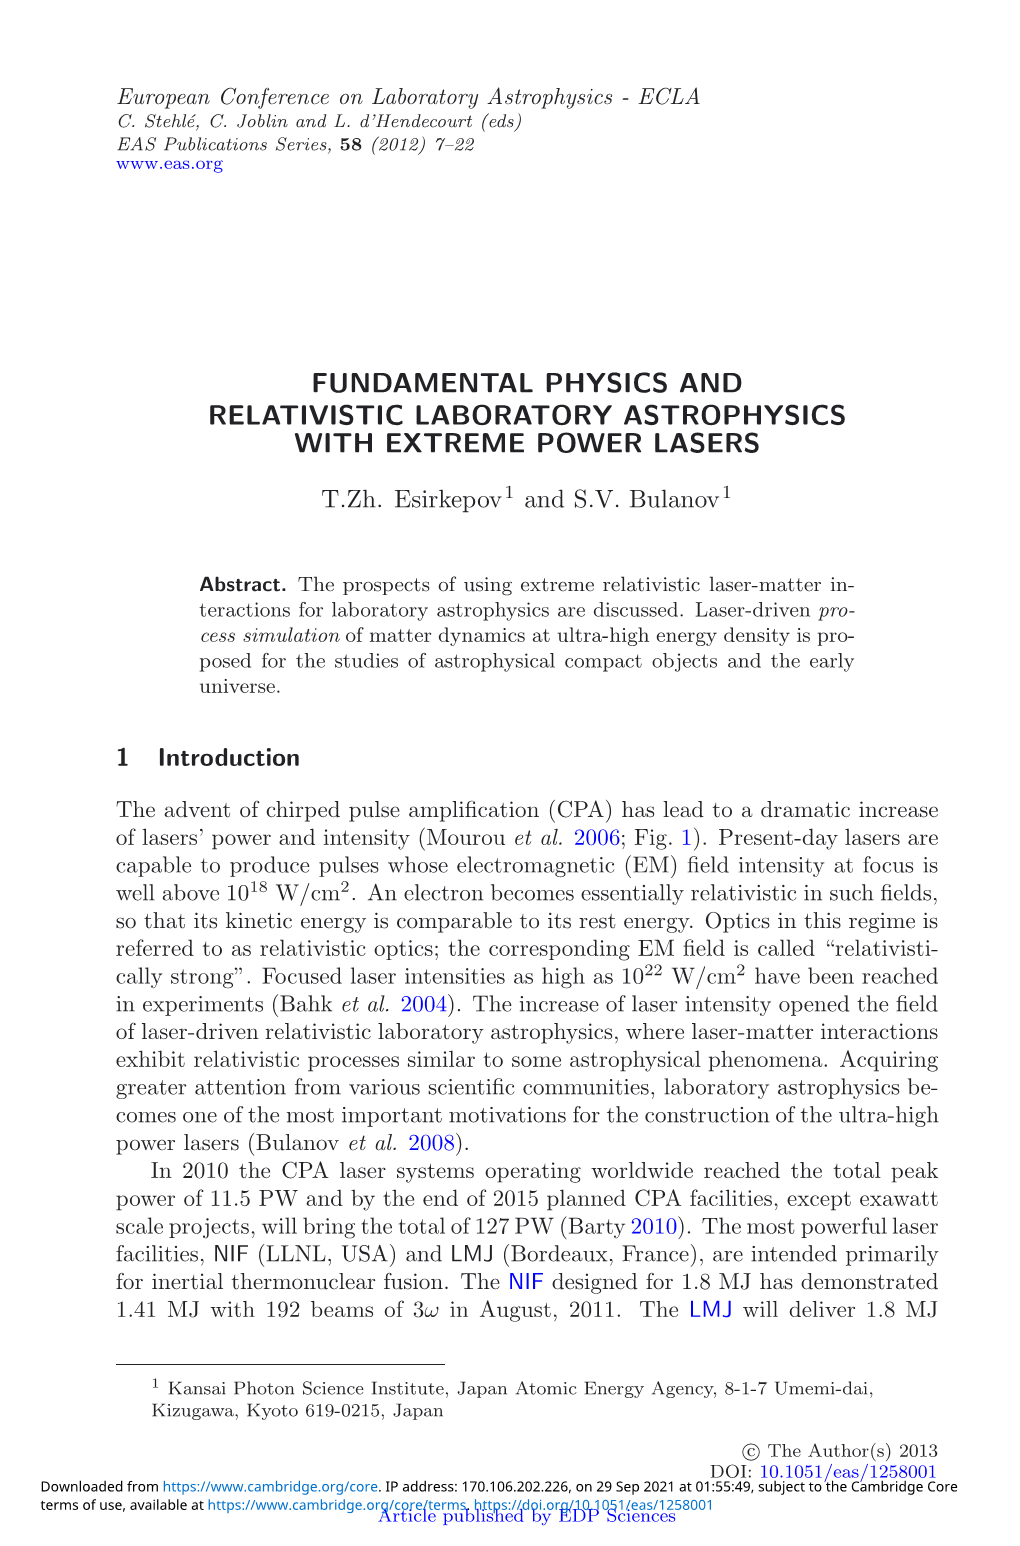 Fundamental Physics and Relativistic Laboratory Astrophysics with Extreme Power Lasers